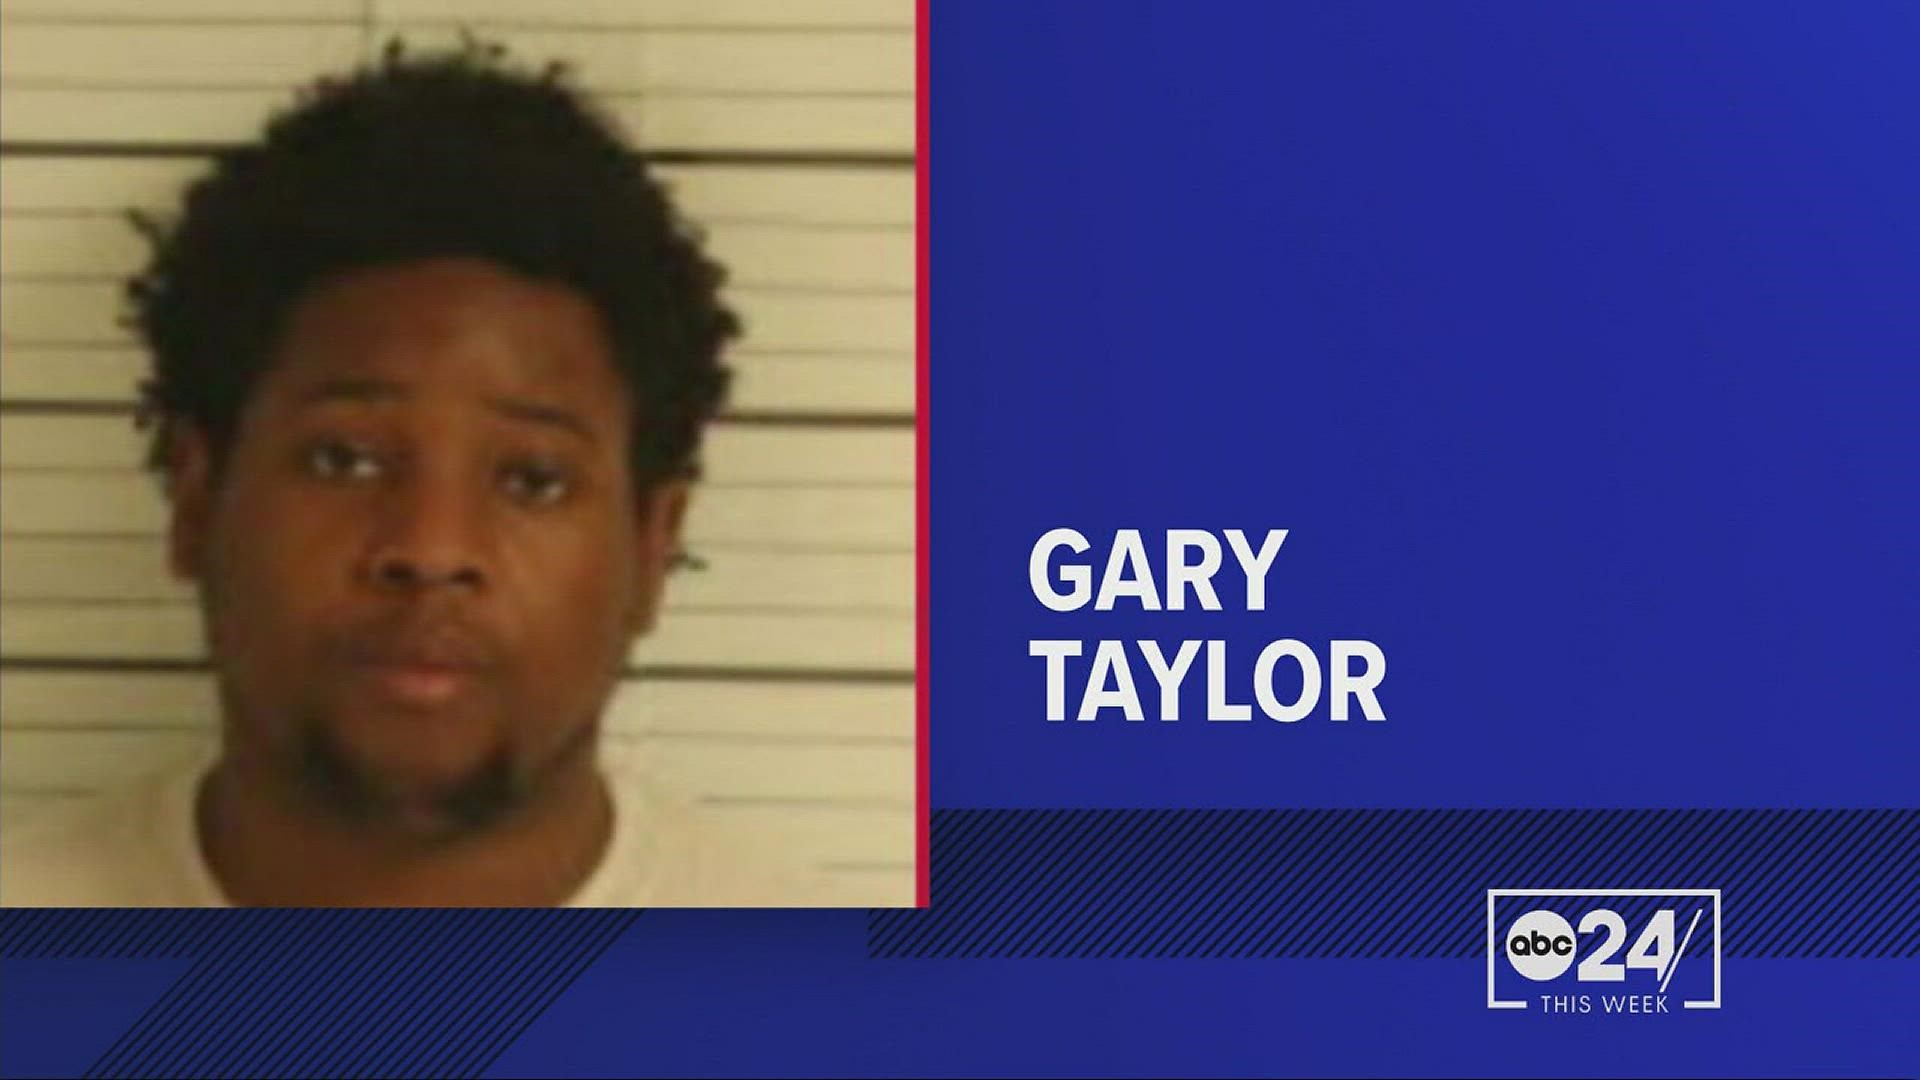 According to the Shelby County District Attorney's Office, a process error resulted in Gary Taylor's release. Taylor had been charged with first degree murder.